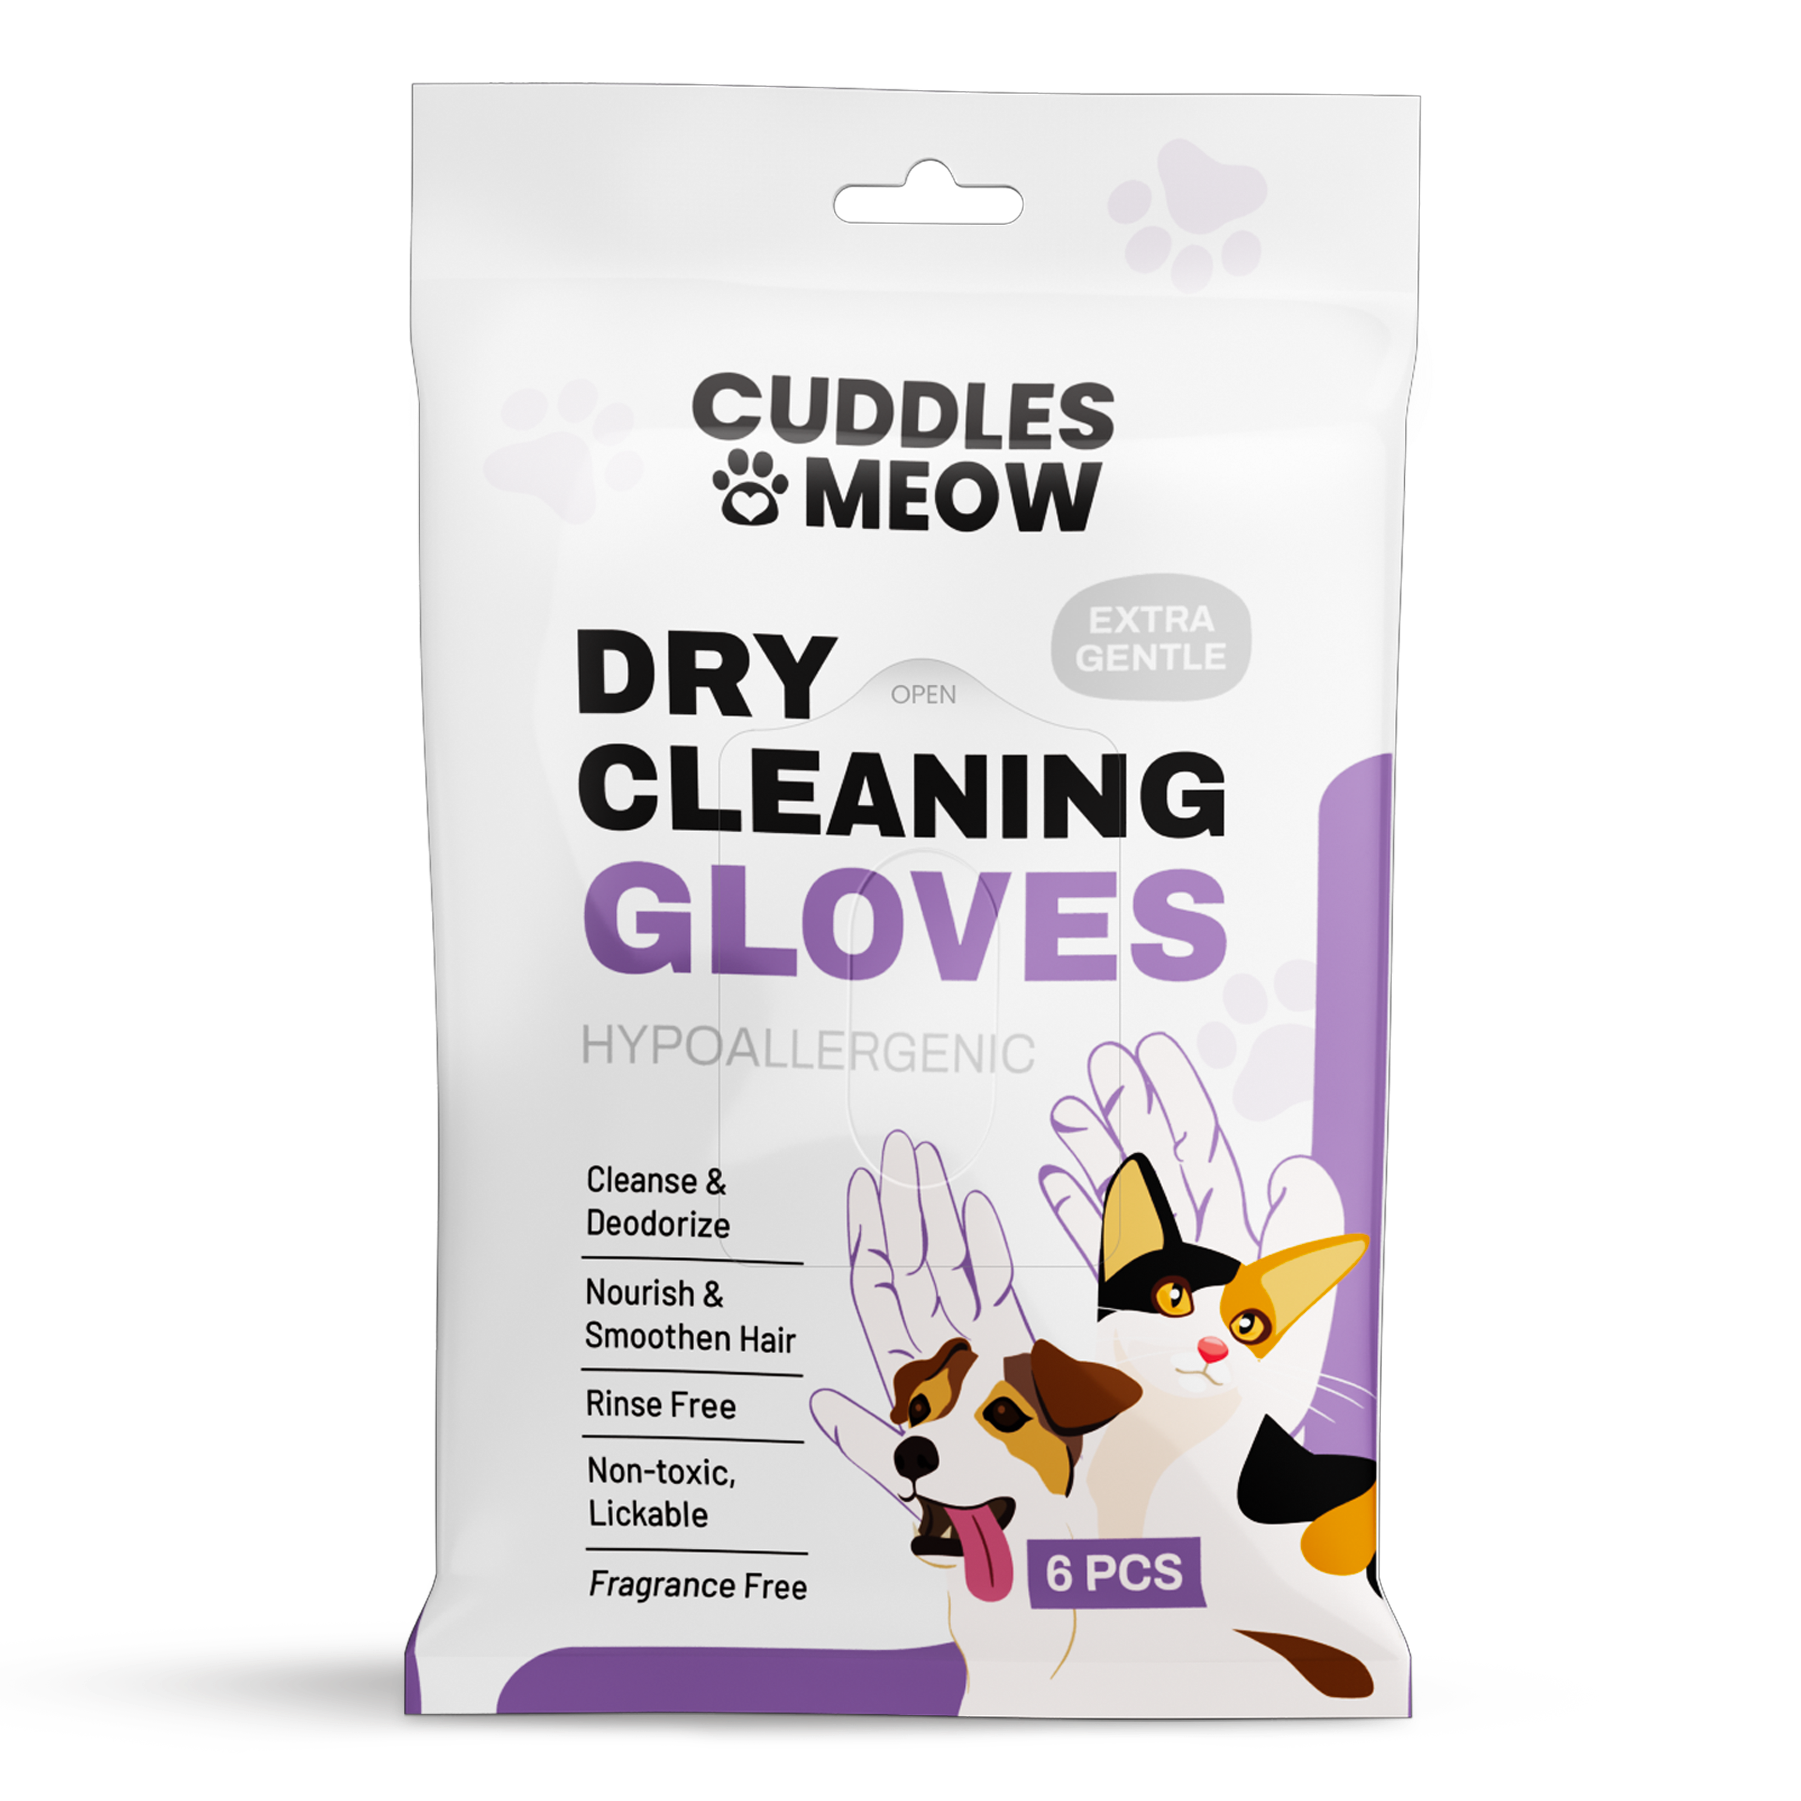 Dry Cleaning Gloves (6 PCS)